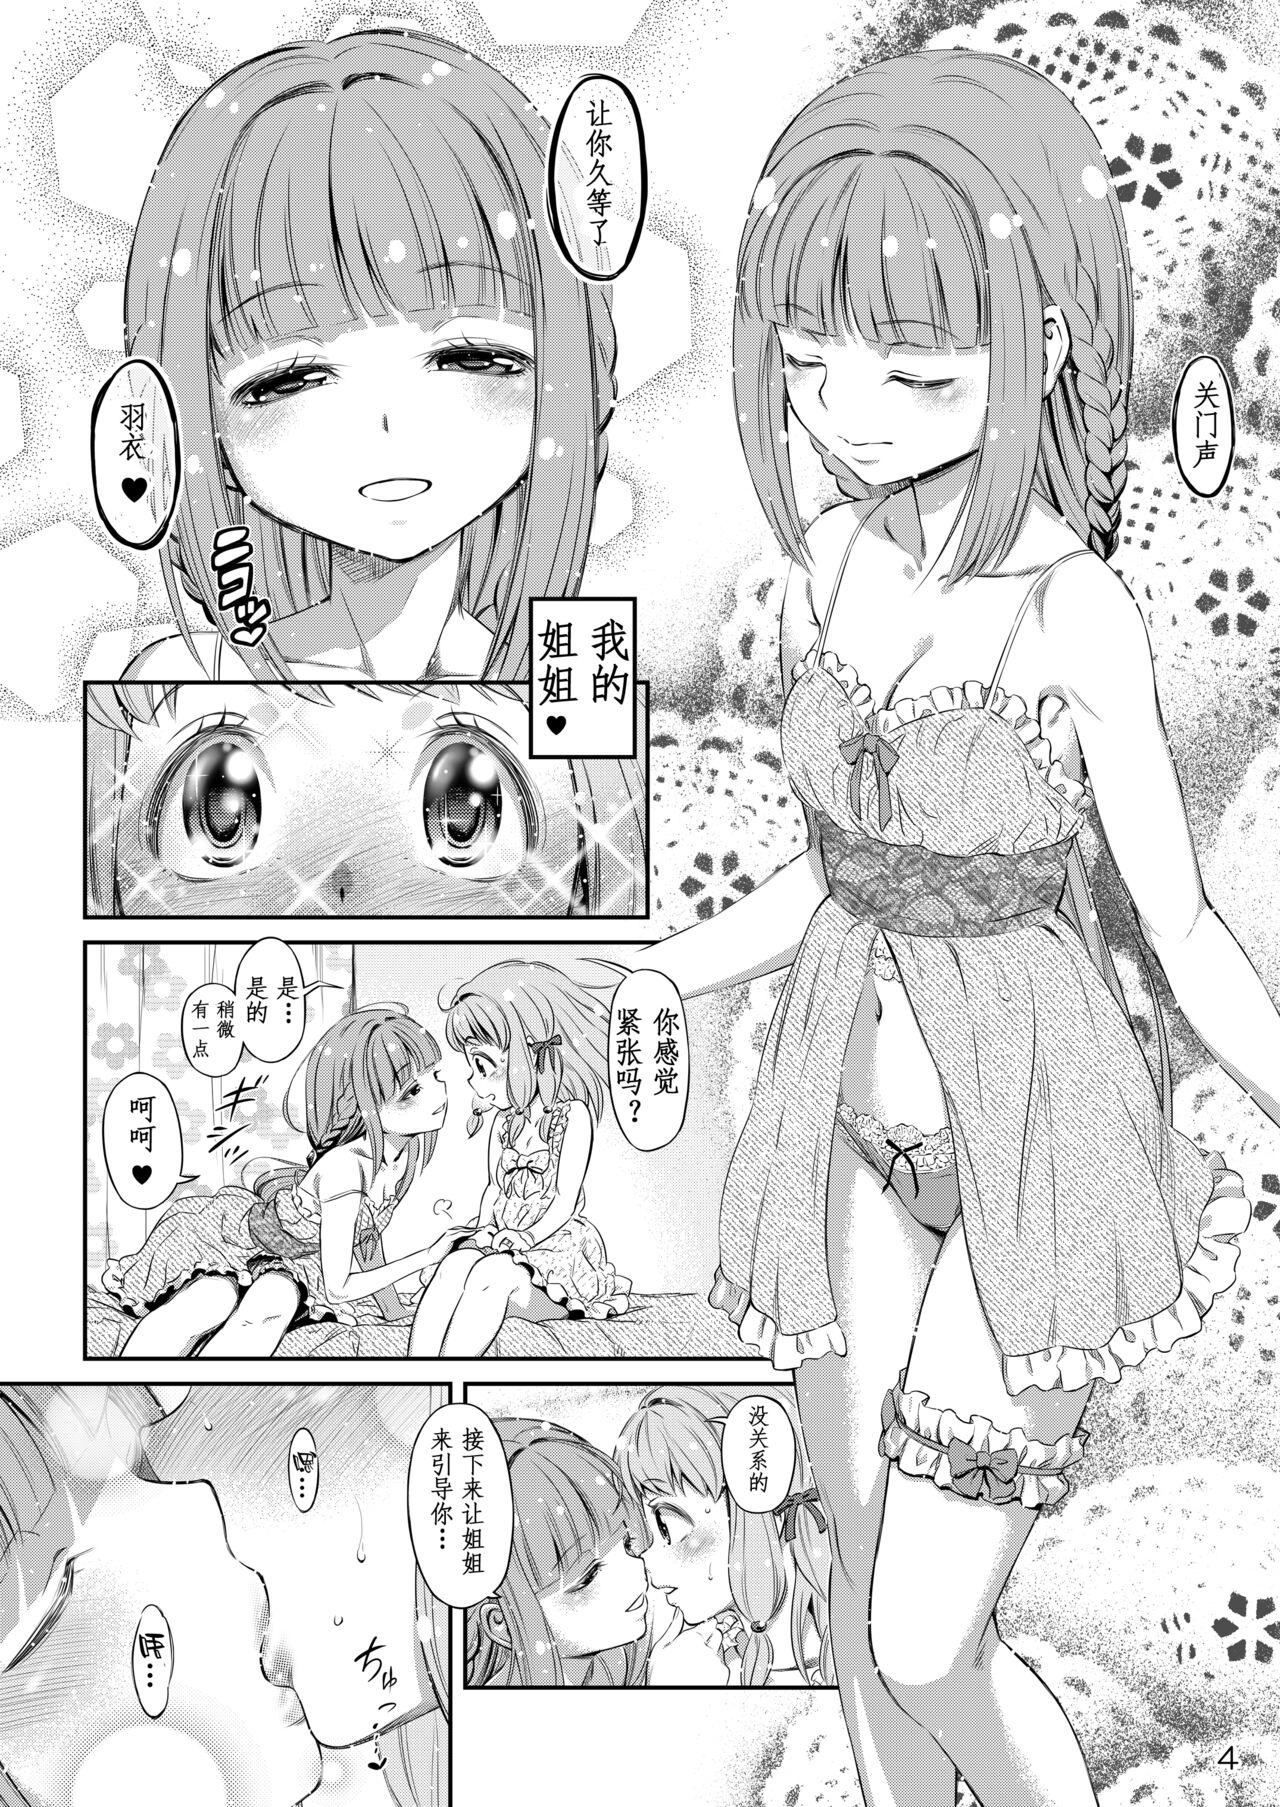 Trimmed Dear My Little Sister - Puella magi madoka magica side story magia record Style - Page 4